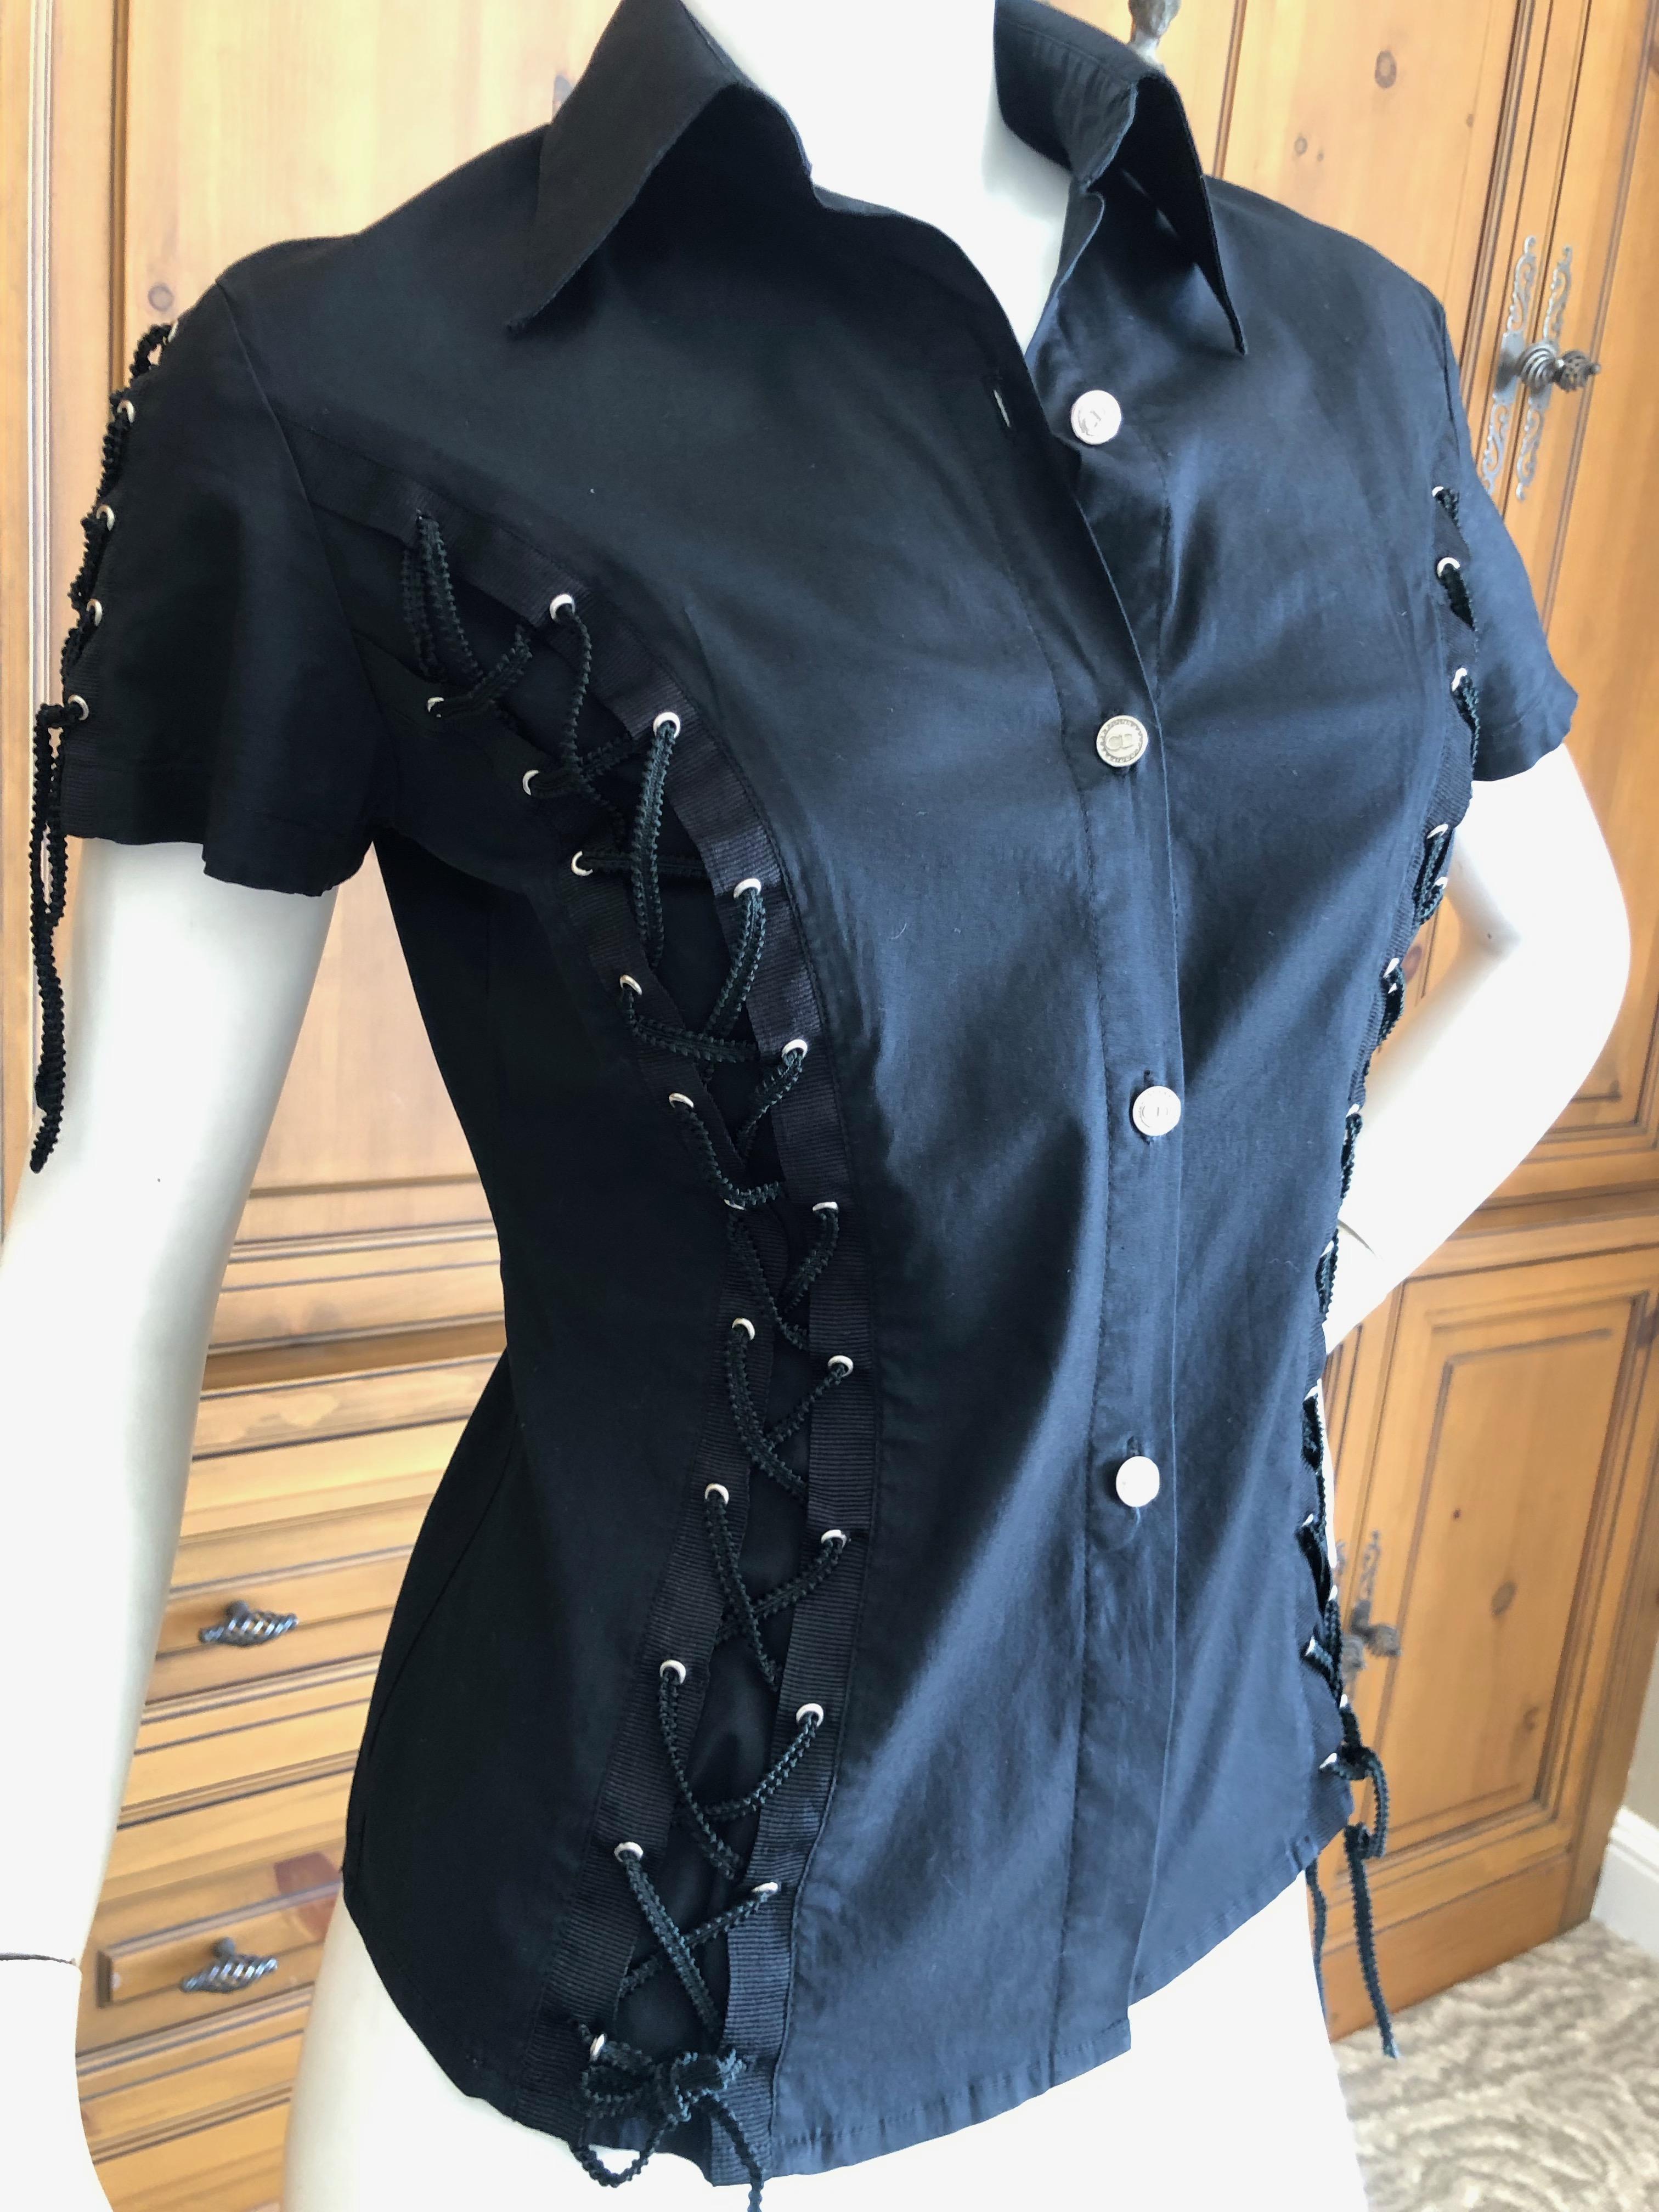 Christian Dior by John Galliano Black Button Up Top with Lace Up Details In New Condition For Sale In Cloverdale, CA